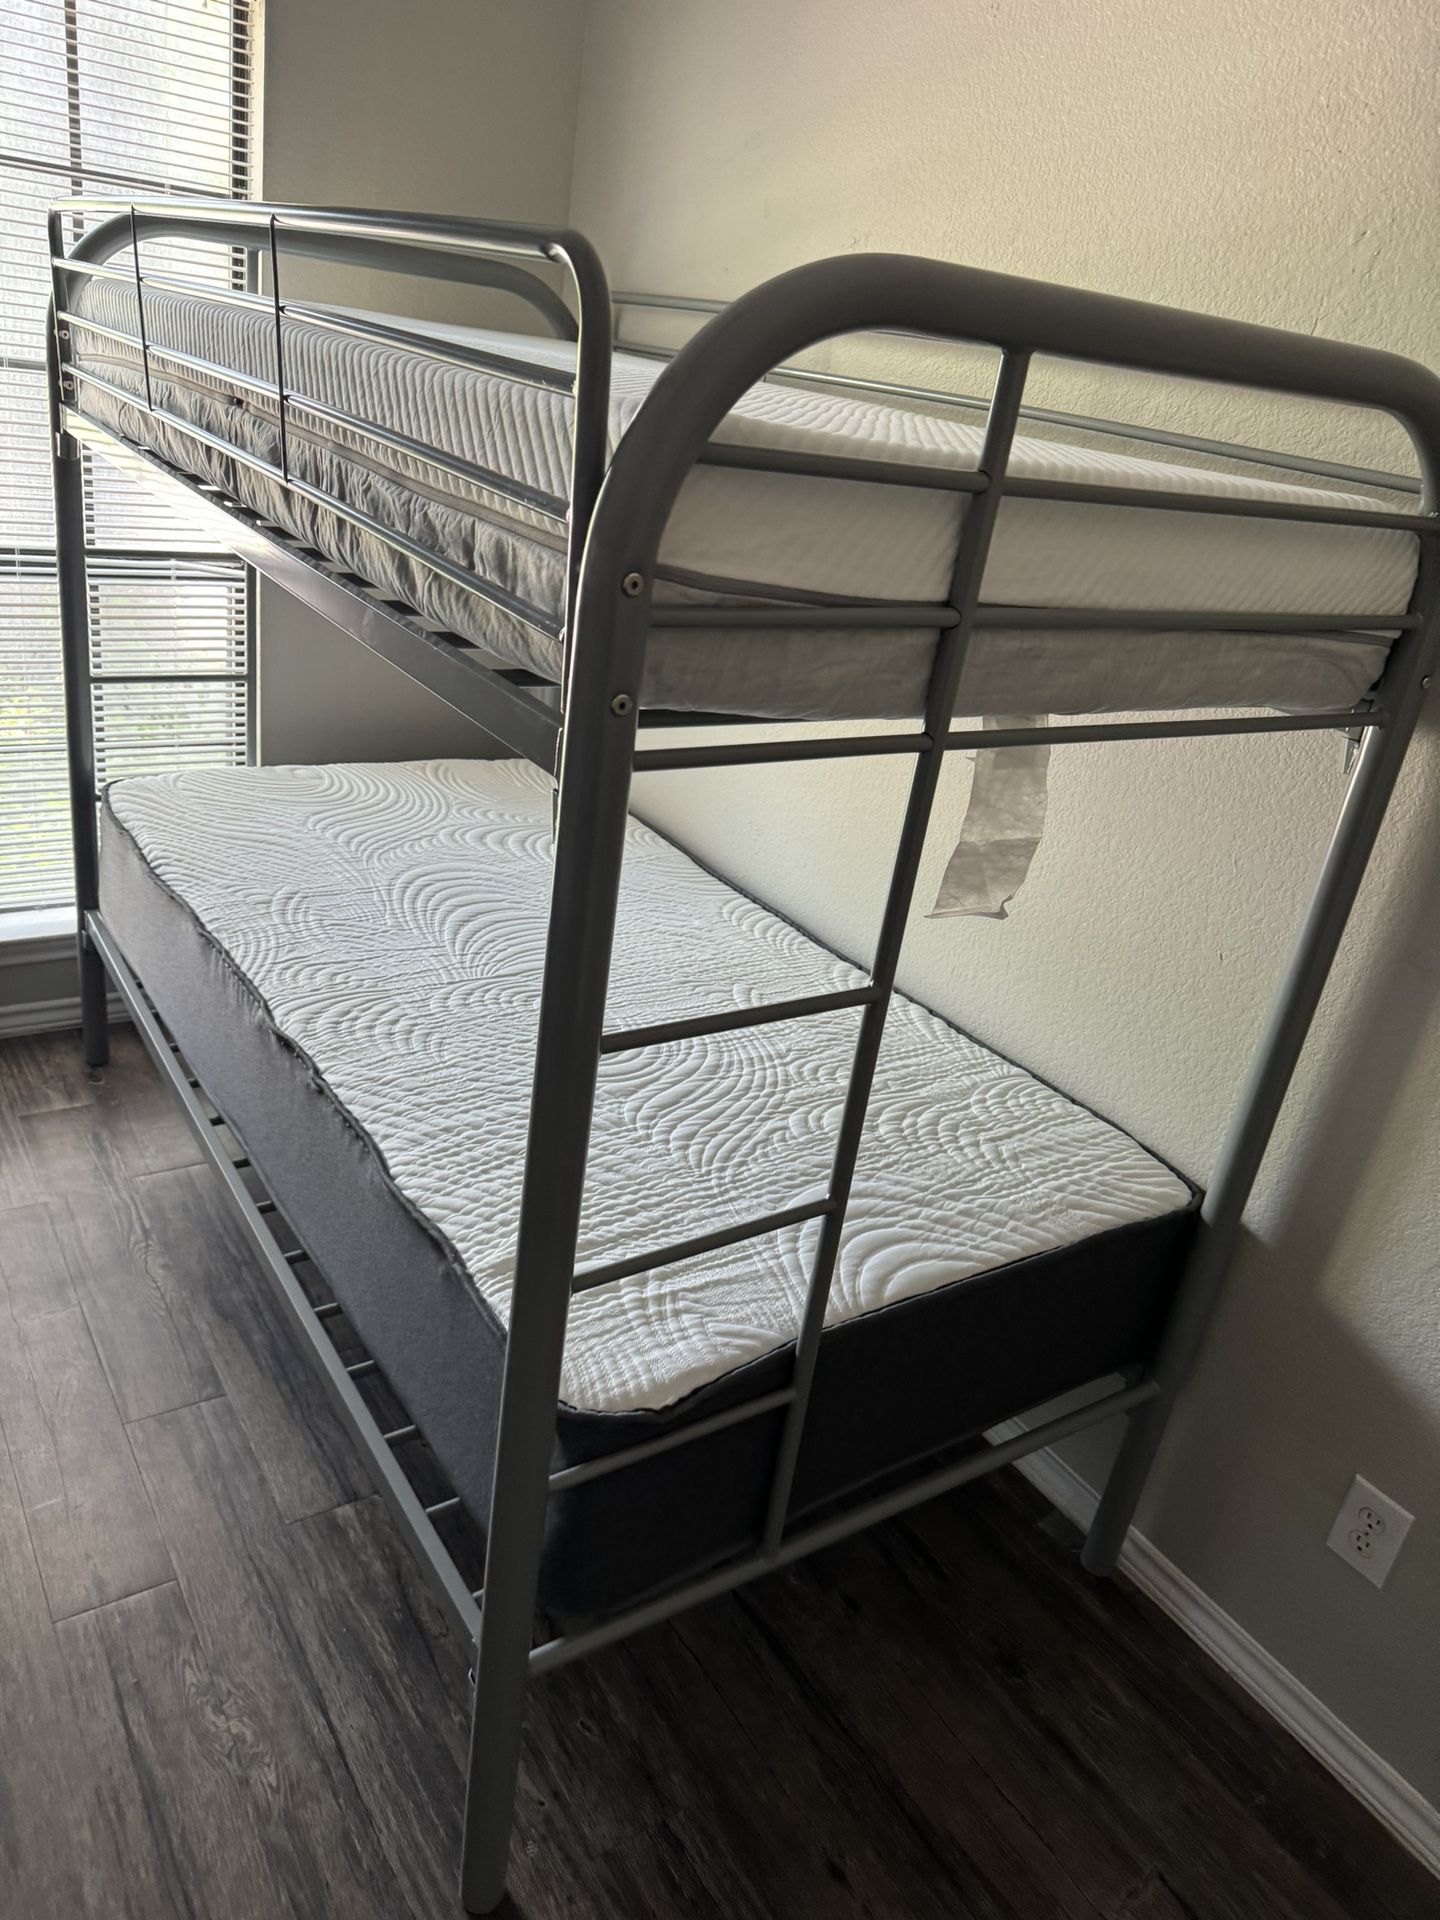 New Bunk Bed For $389